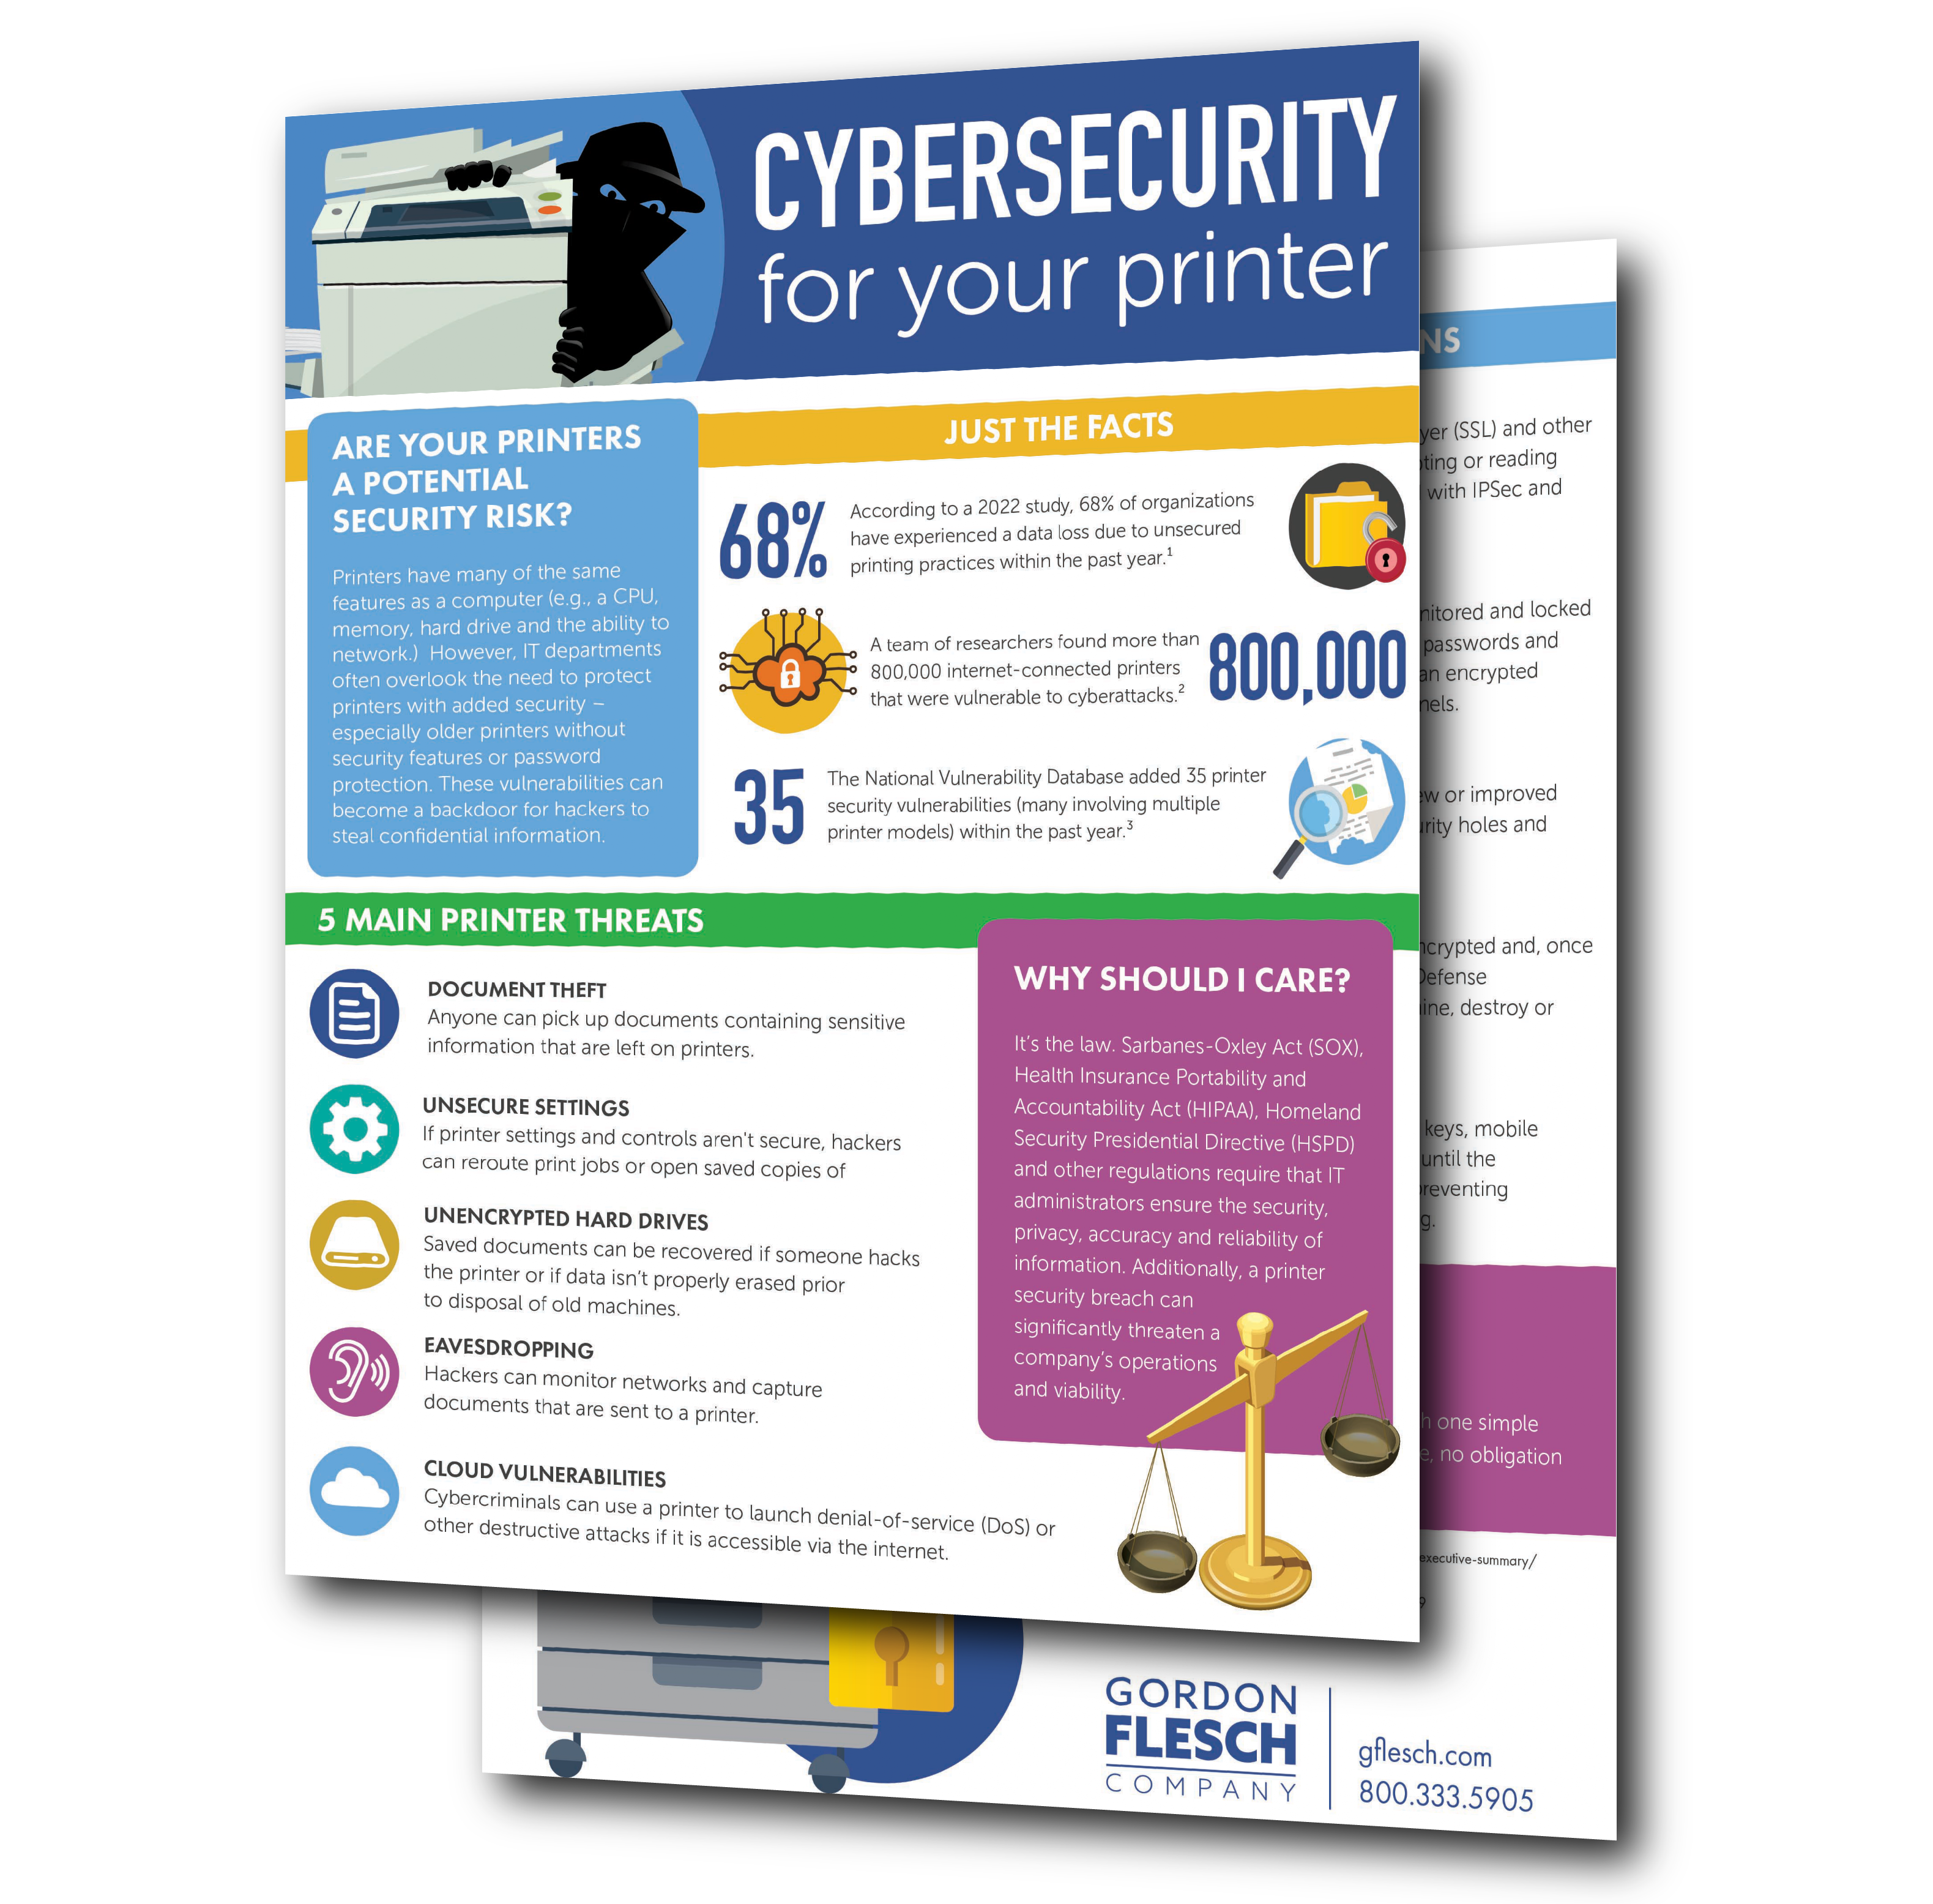 22-086_Cybersecurity-for-Printers_Pages